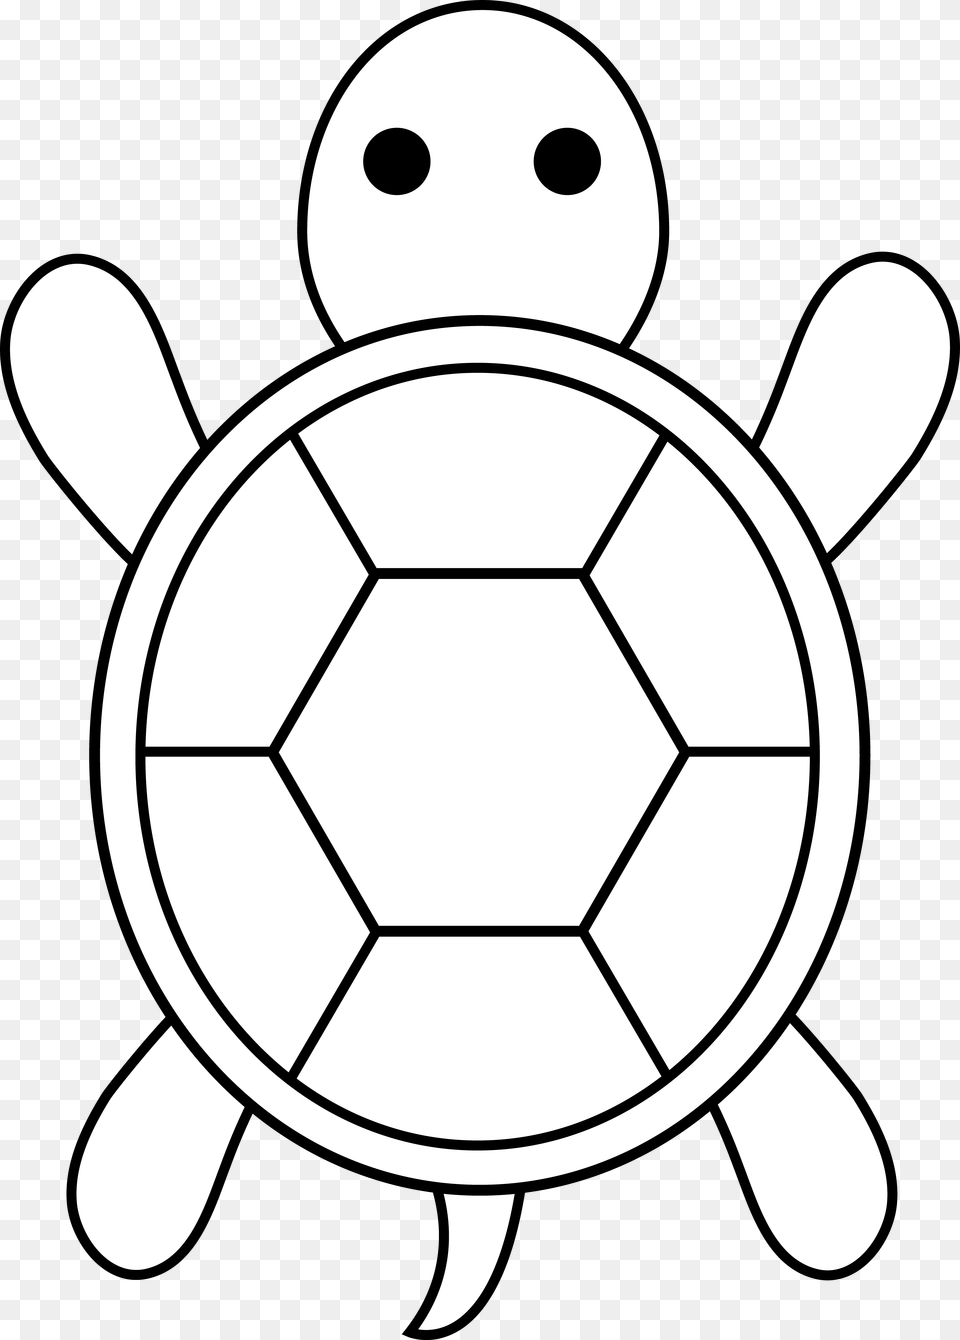 Sat Clipart Black And White Sea Turtle Outline, Ball, Football, Soccer, Soccer Ball Png Image